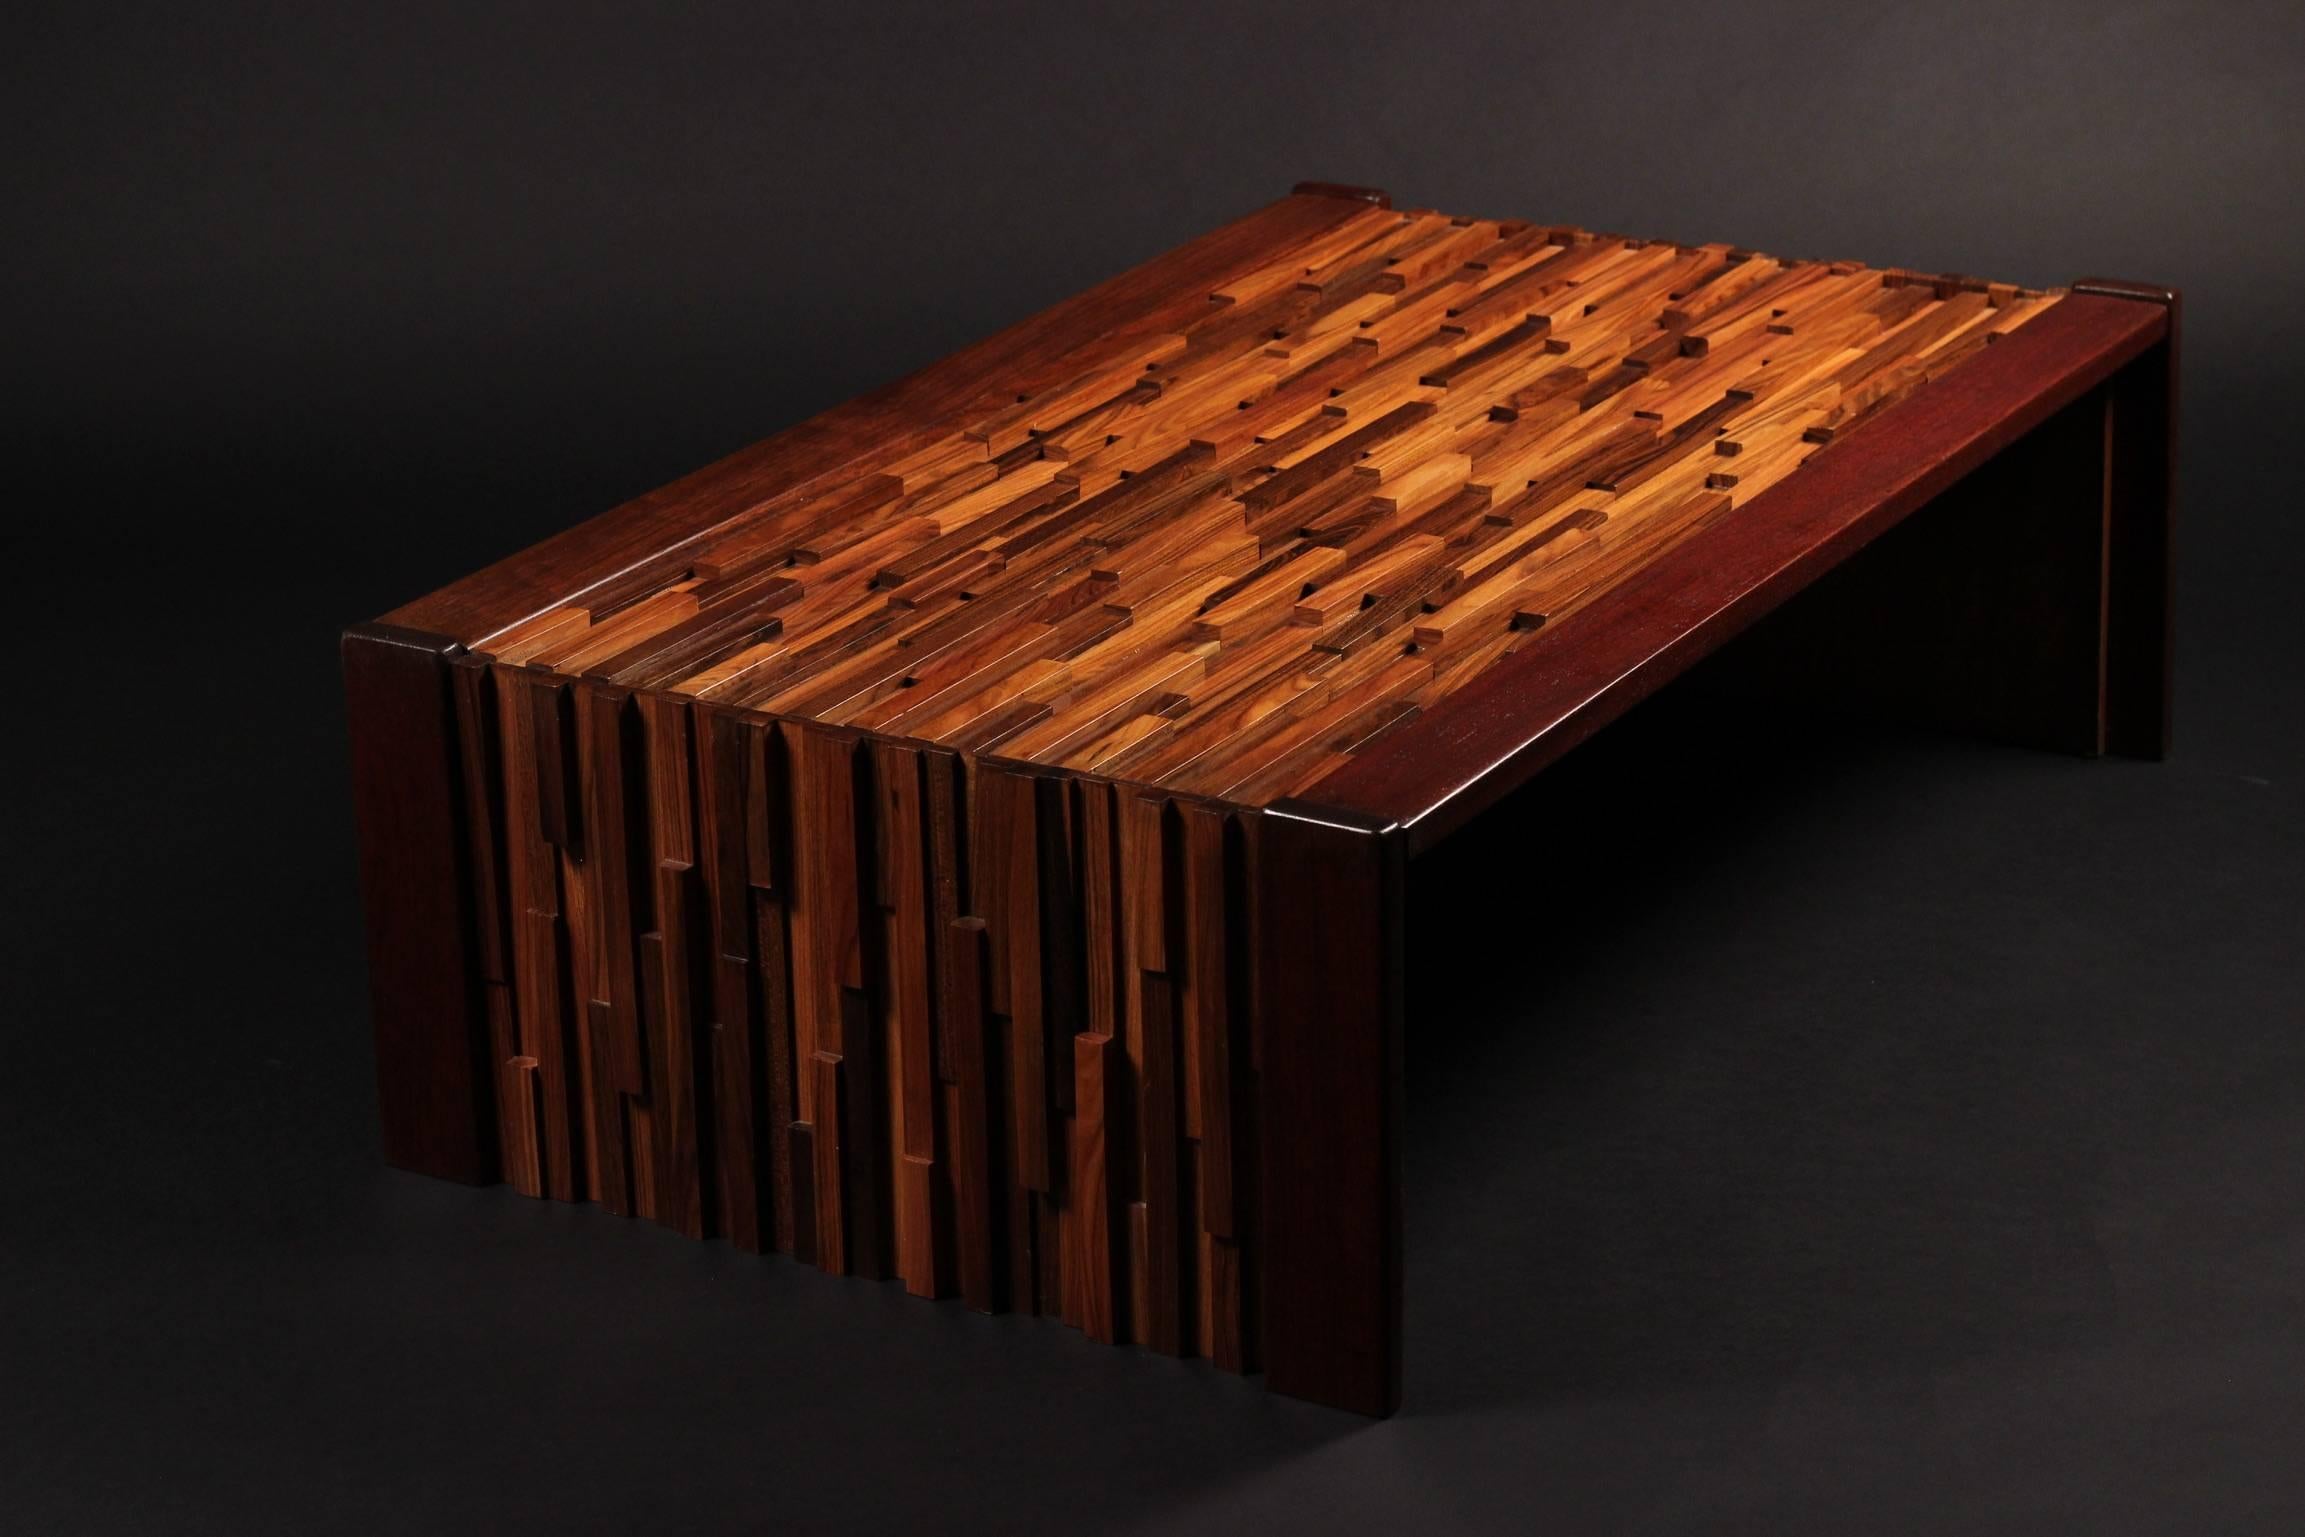 A Brazilian coffee or cocktail table with a wonderful sculptural quality. A relief of various tropical hardwoods in different heights and lengths to create a Brutalist effect, edged with Mahogany and fitted glass top. A table that comes to life when